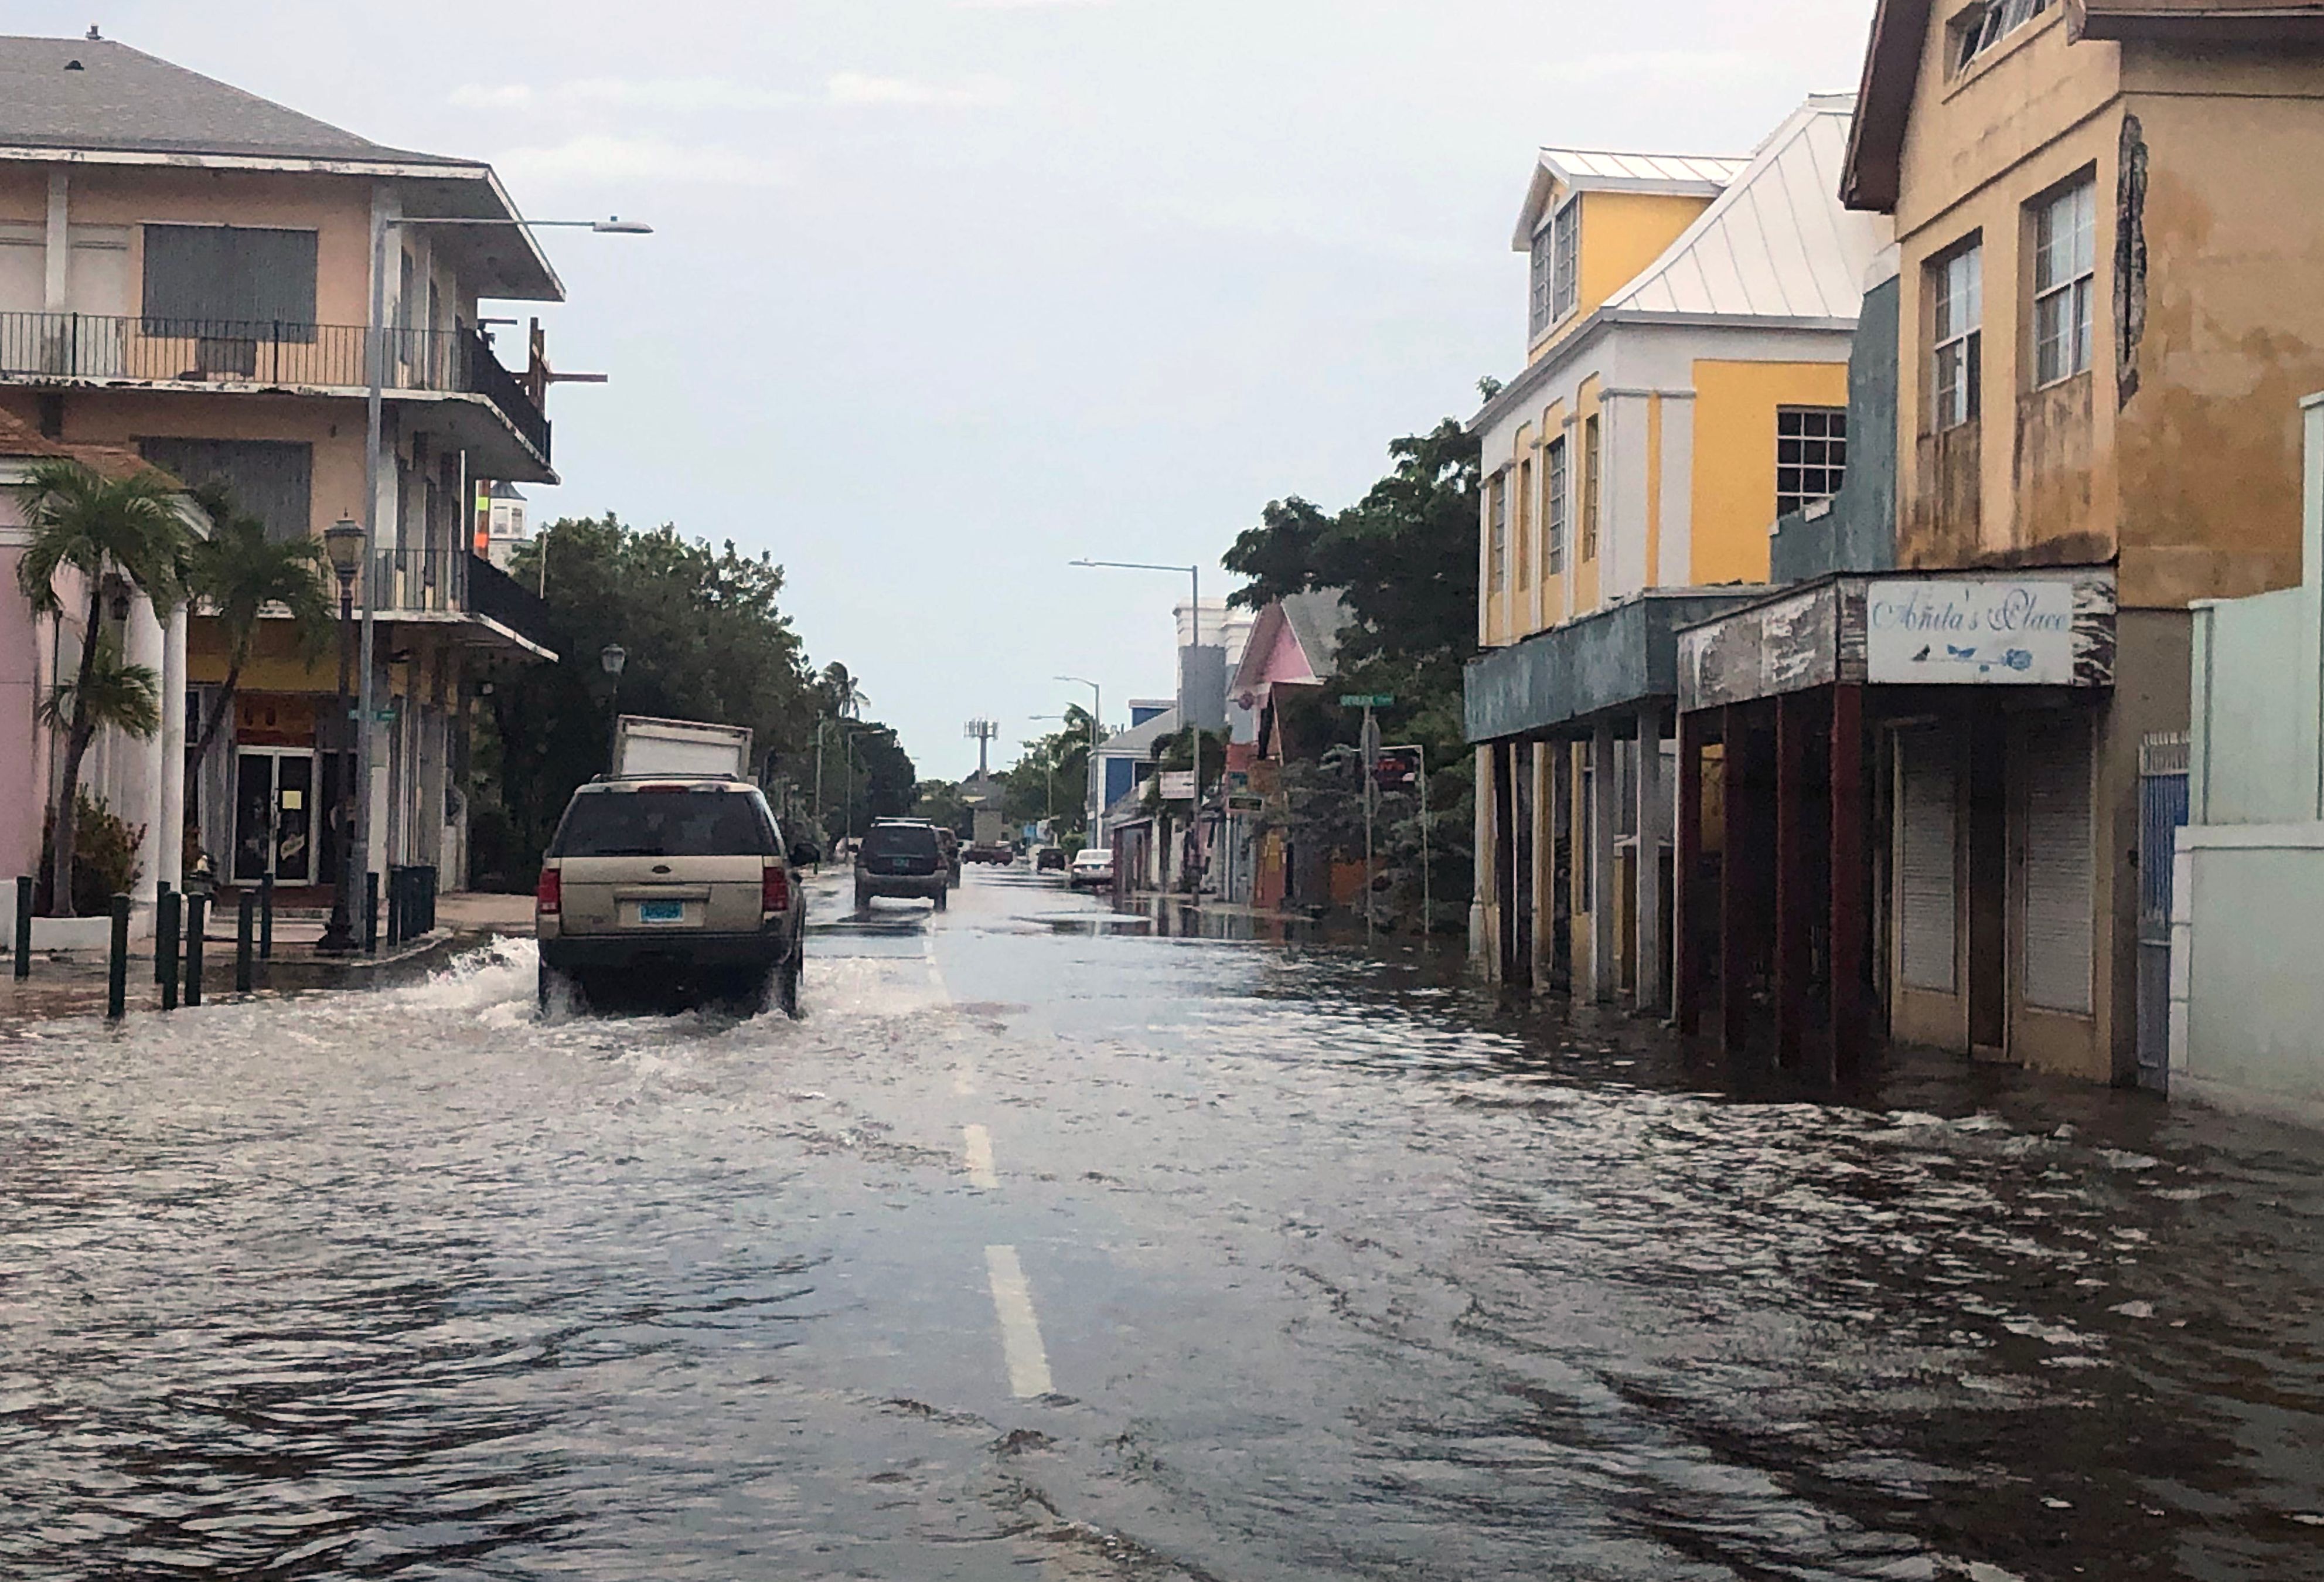 View of a flooded street in downtown Nassau on September 3, 2019. (LUCY WORBOYS/AFP/Getty Images)